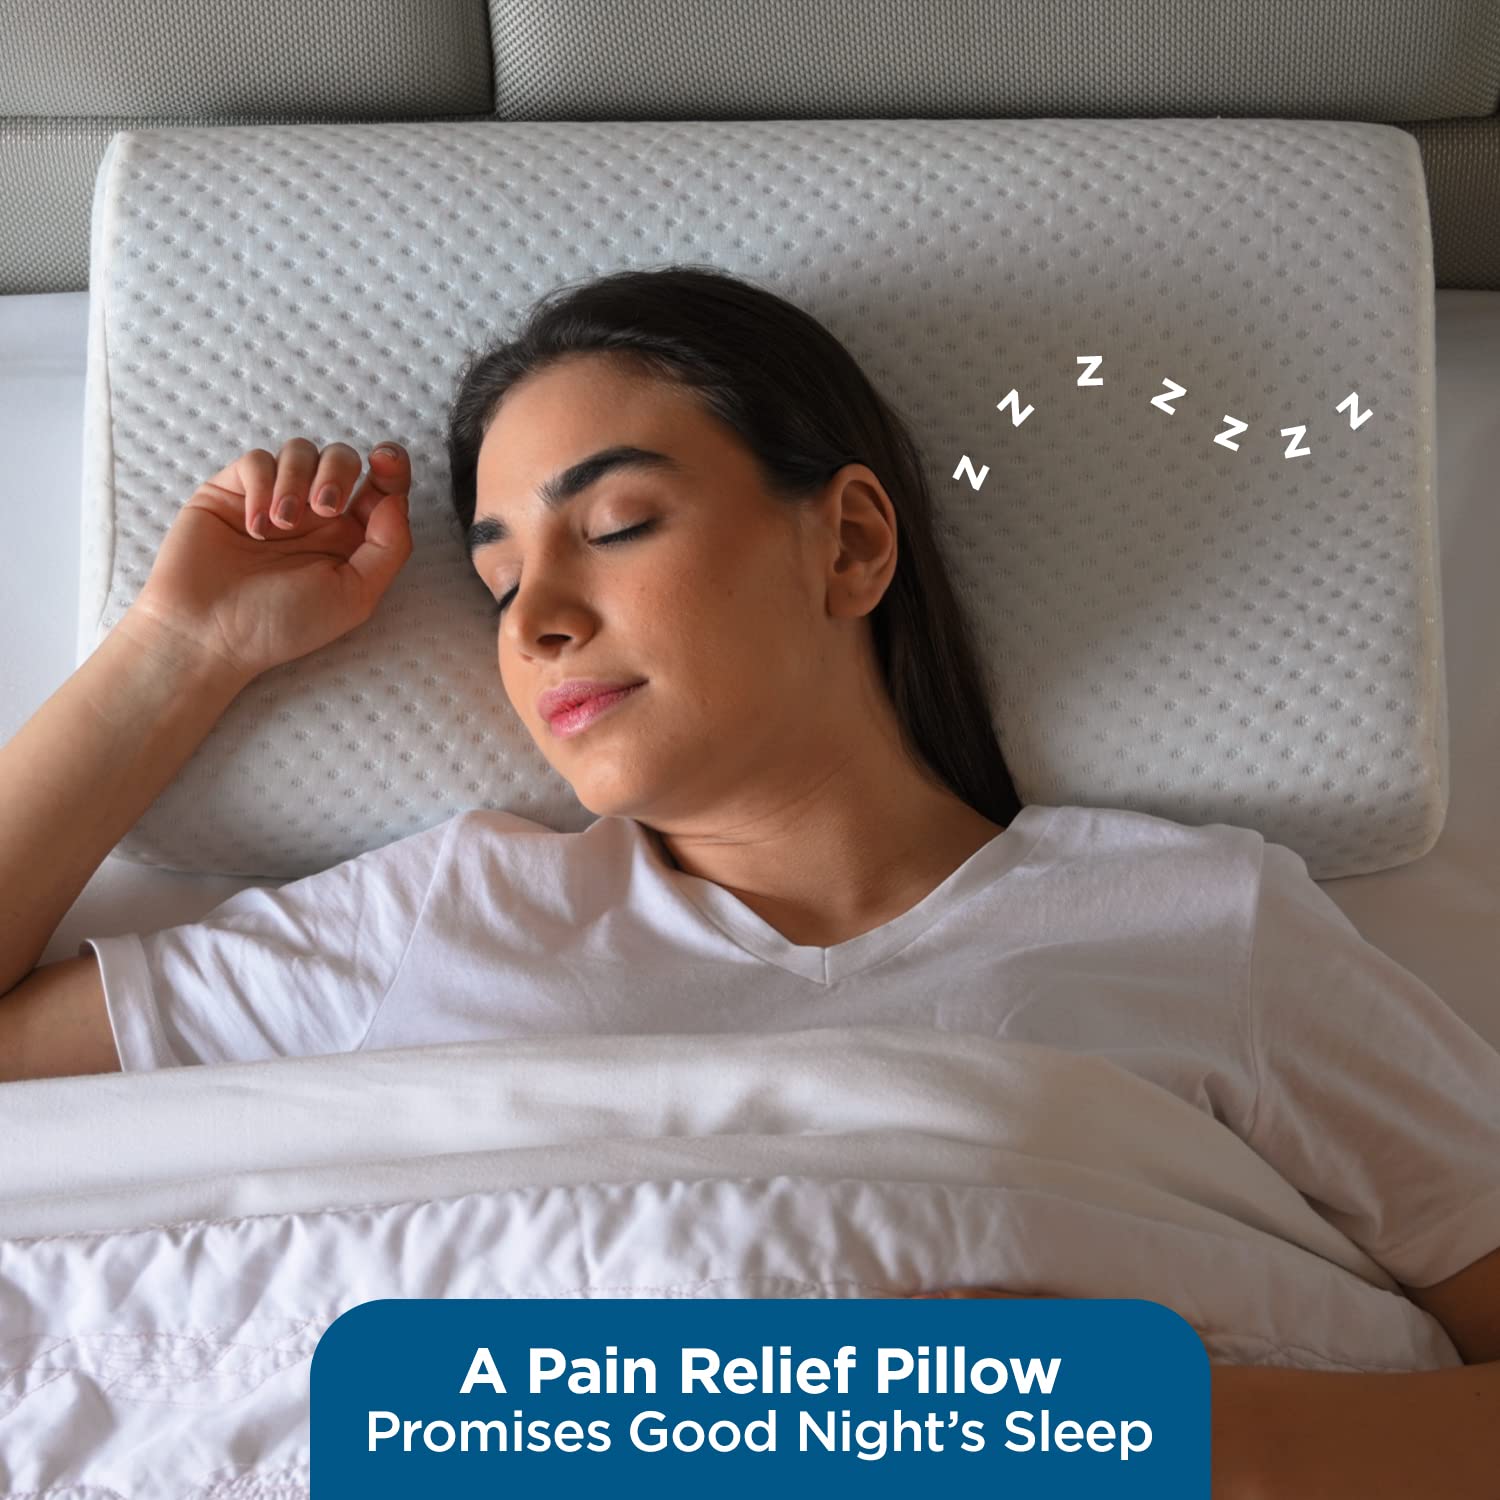 Cervical Memory Foam Pillow: Sleep in perfect harmony for restful nights - Write on Wall "Global Community of writers"